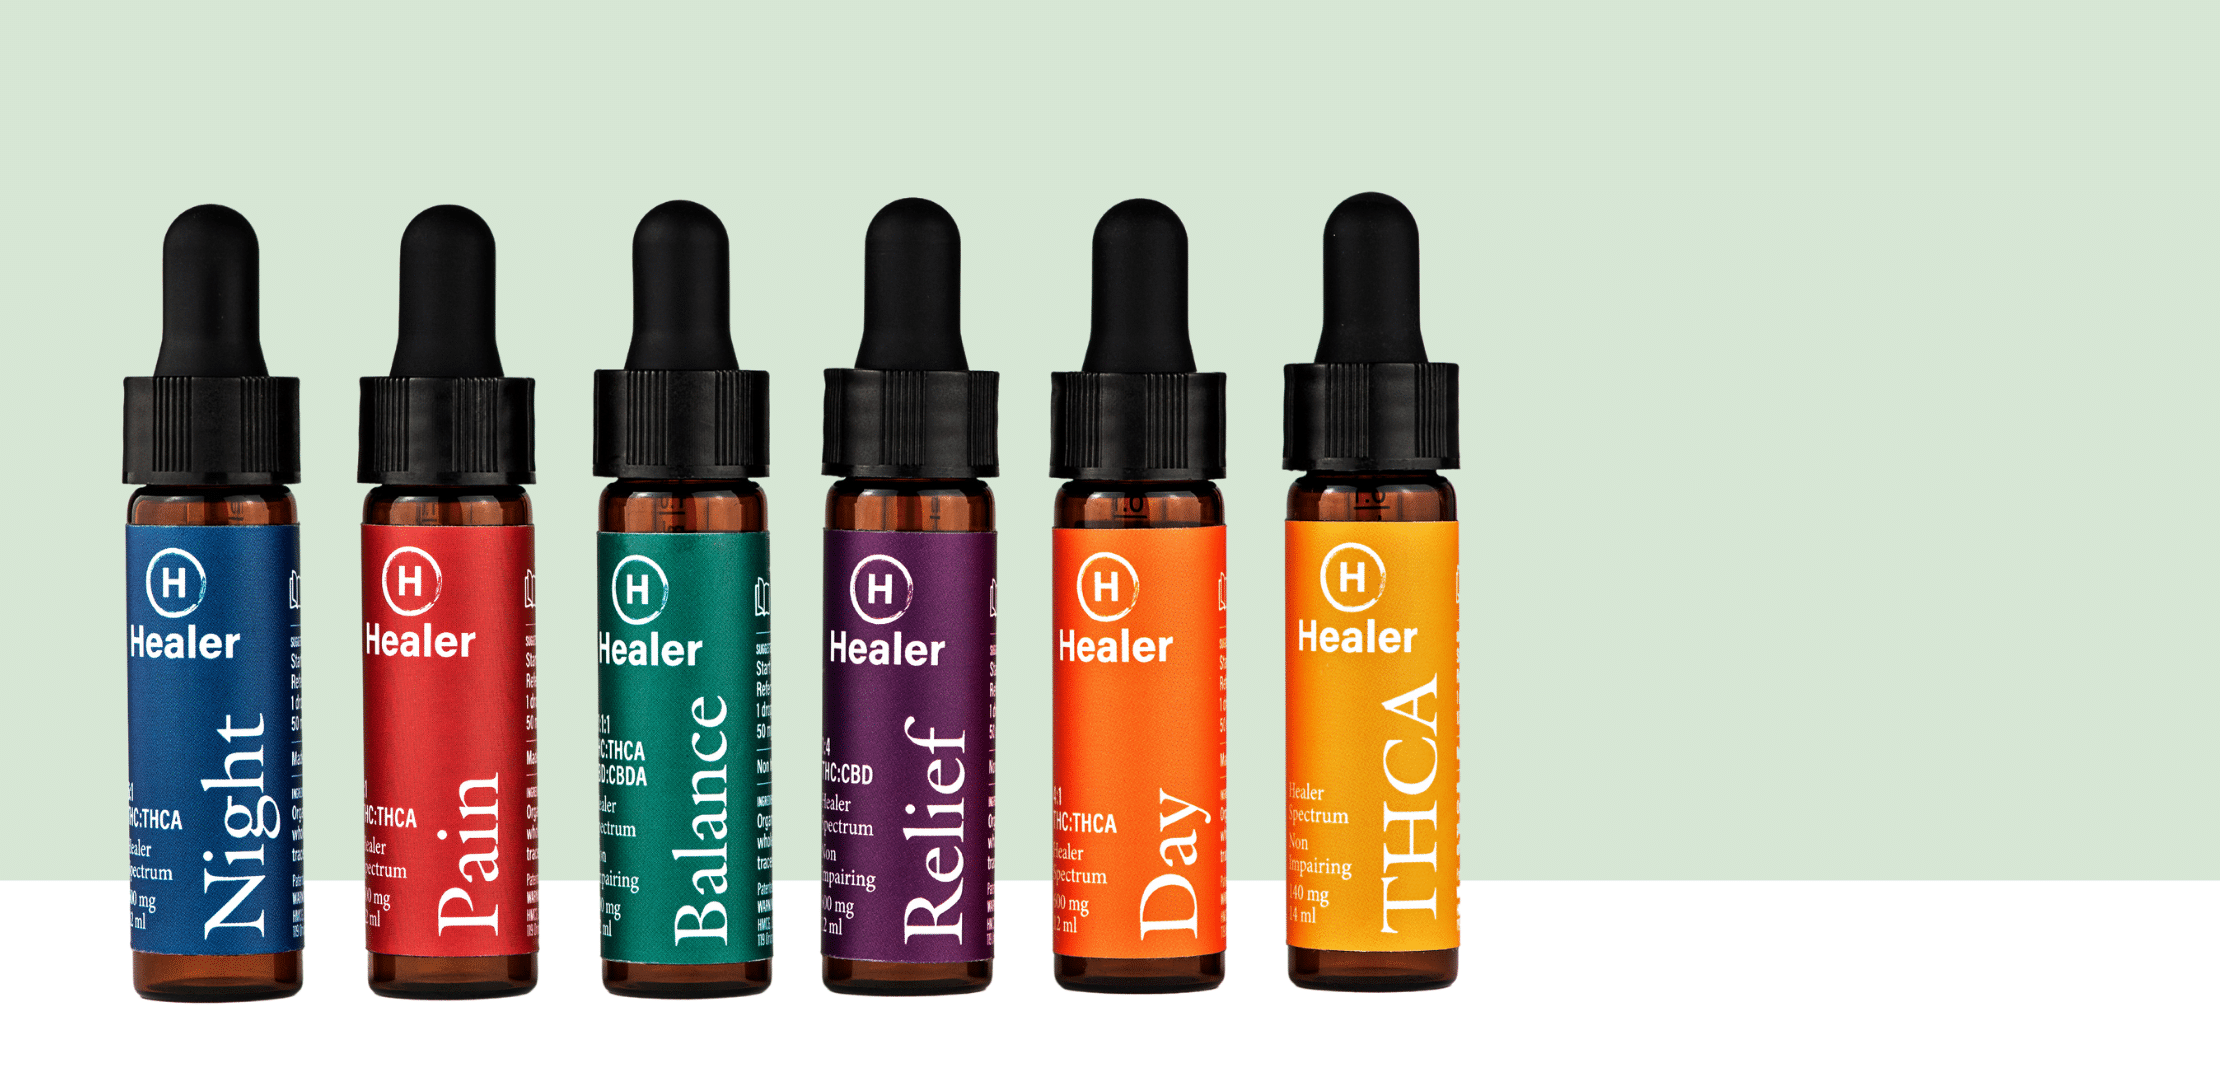 Healer Cannabis Products